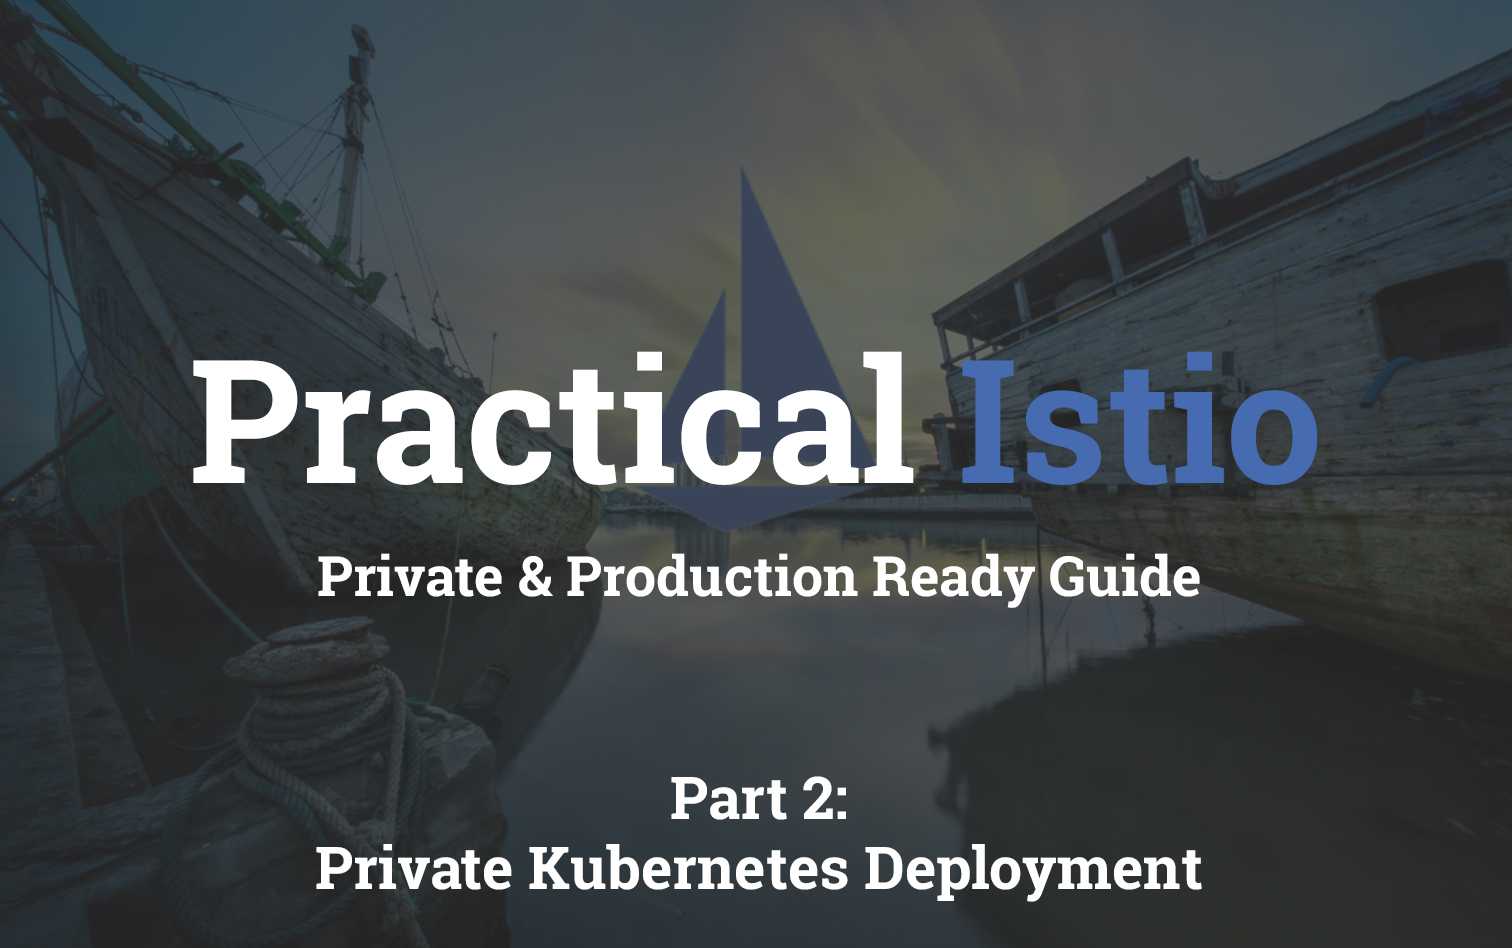 Practical Istio - Private Kubernetes Deployment